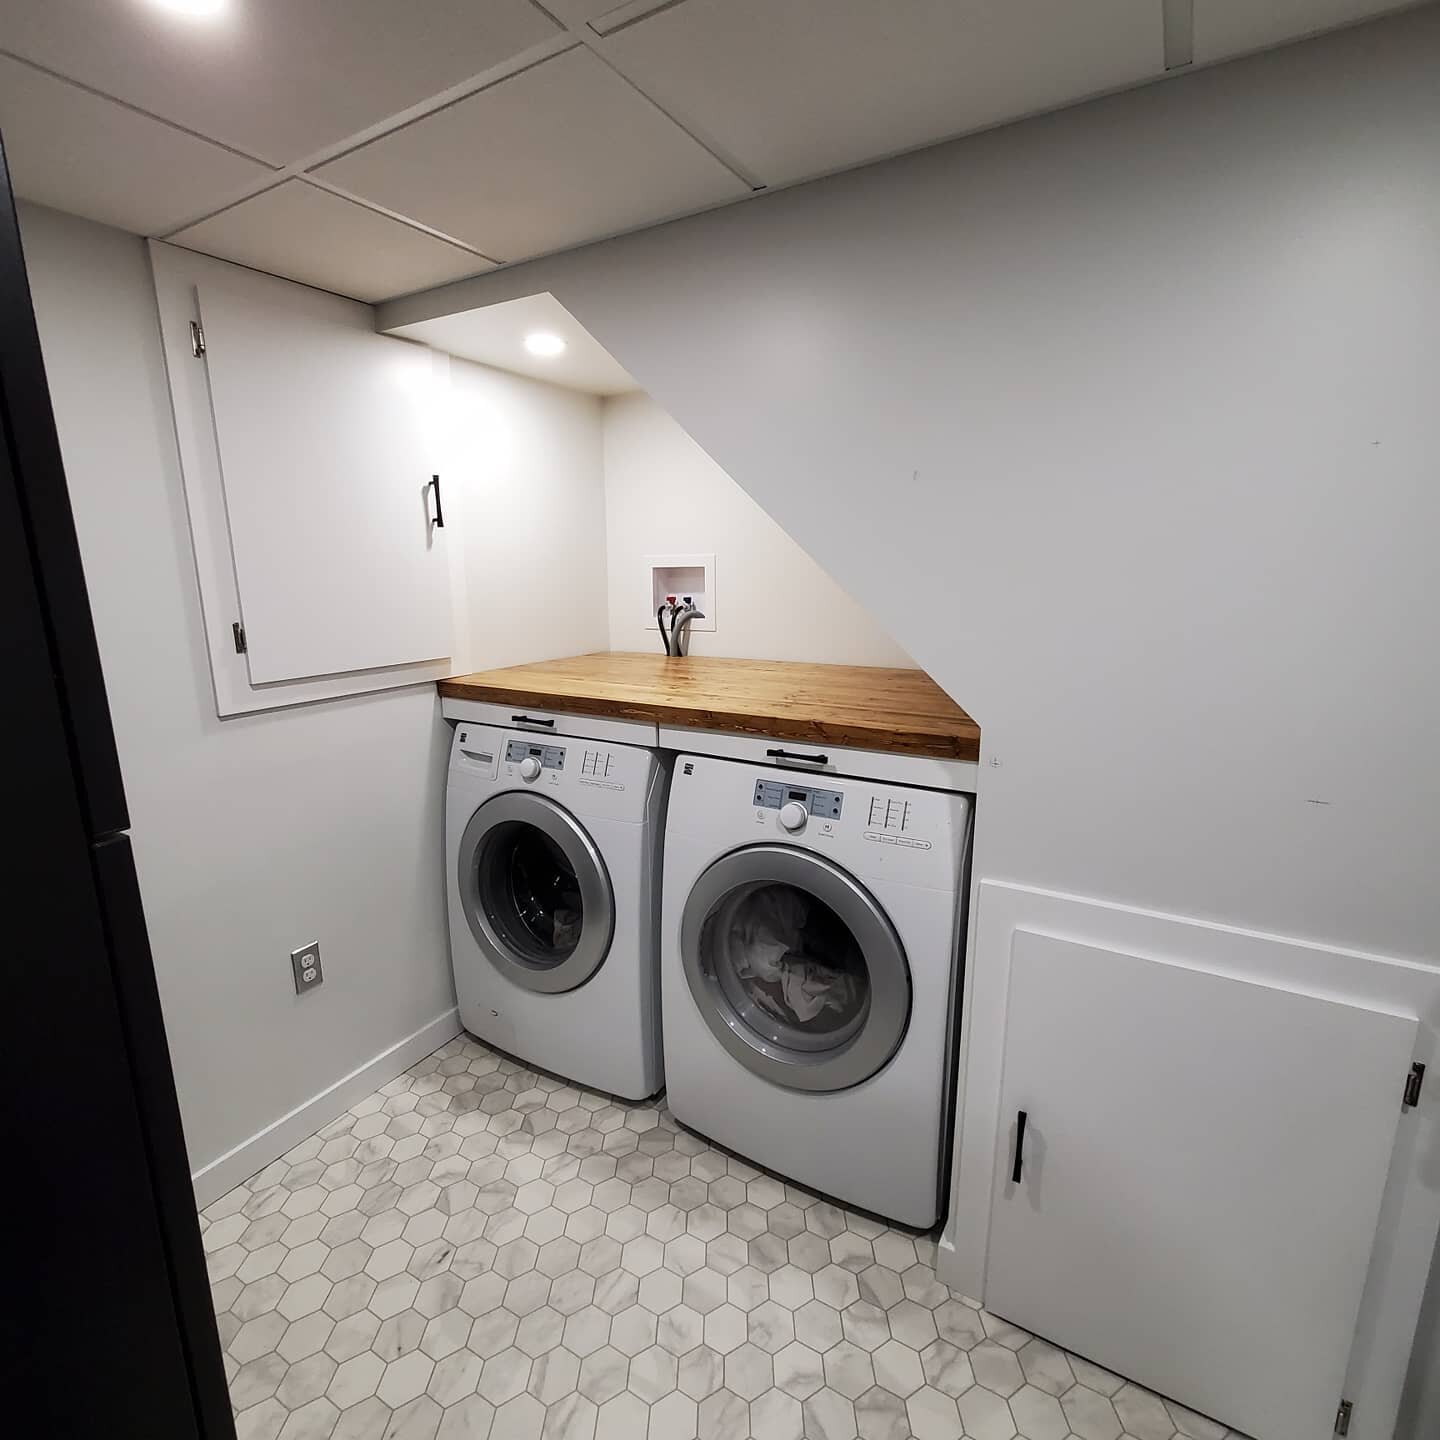 Home stretch on this laundry/mechanical  room. Just need to install the floating shelfs once the hardware gets here and tile the walls above the countertop. 

We have a few new projects on the go and need to step away from this one for a little bit. 